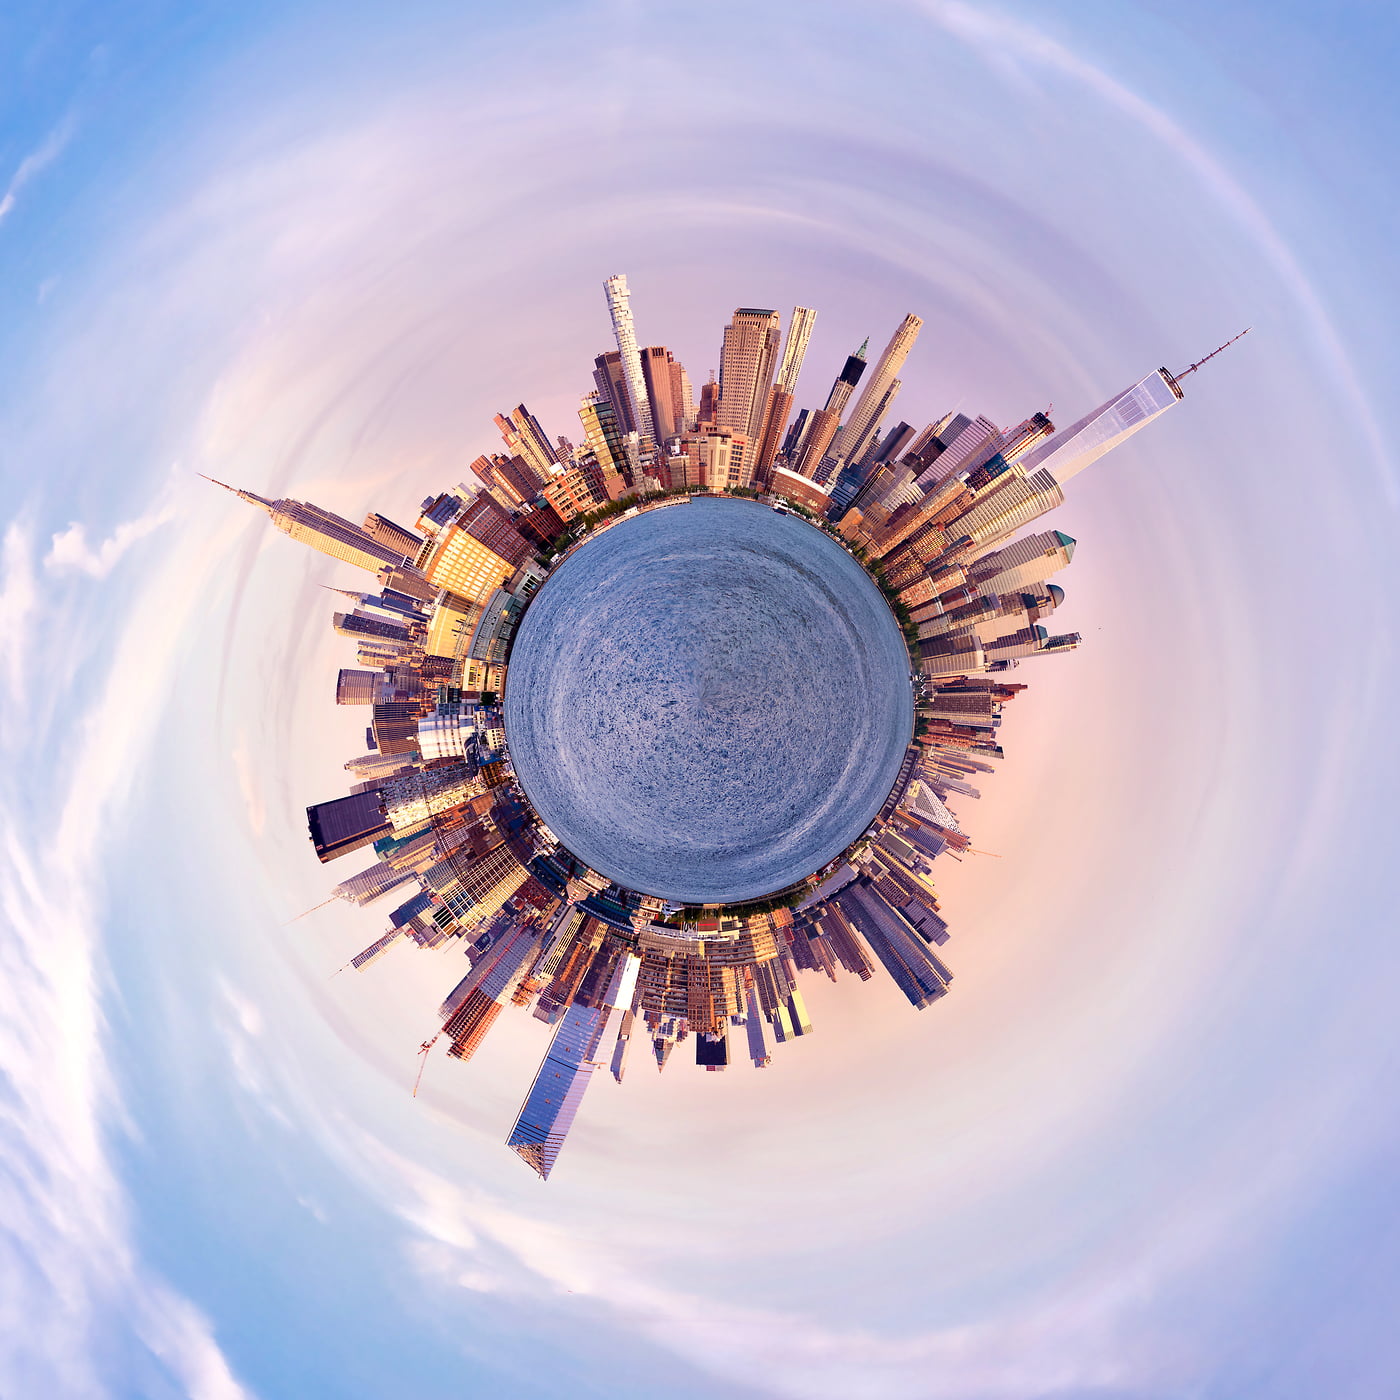 304 megapixels! A very high definition abstract spherical planet VAST photo of the Manhattan skyline skyscrapers in New York City; cityscape artwork created by Dan Piech